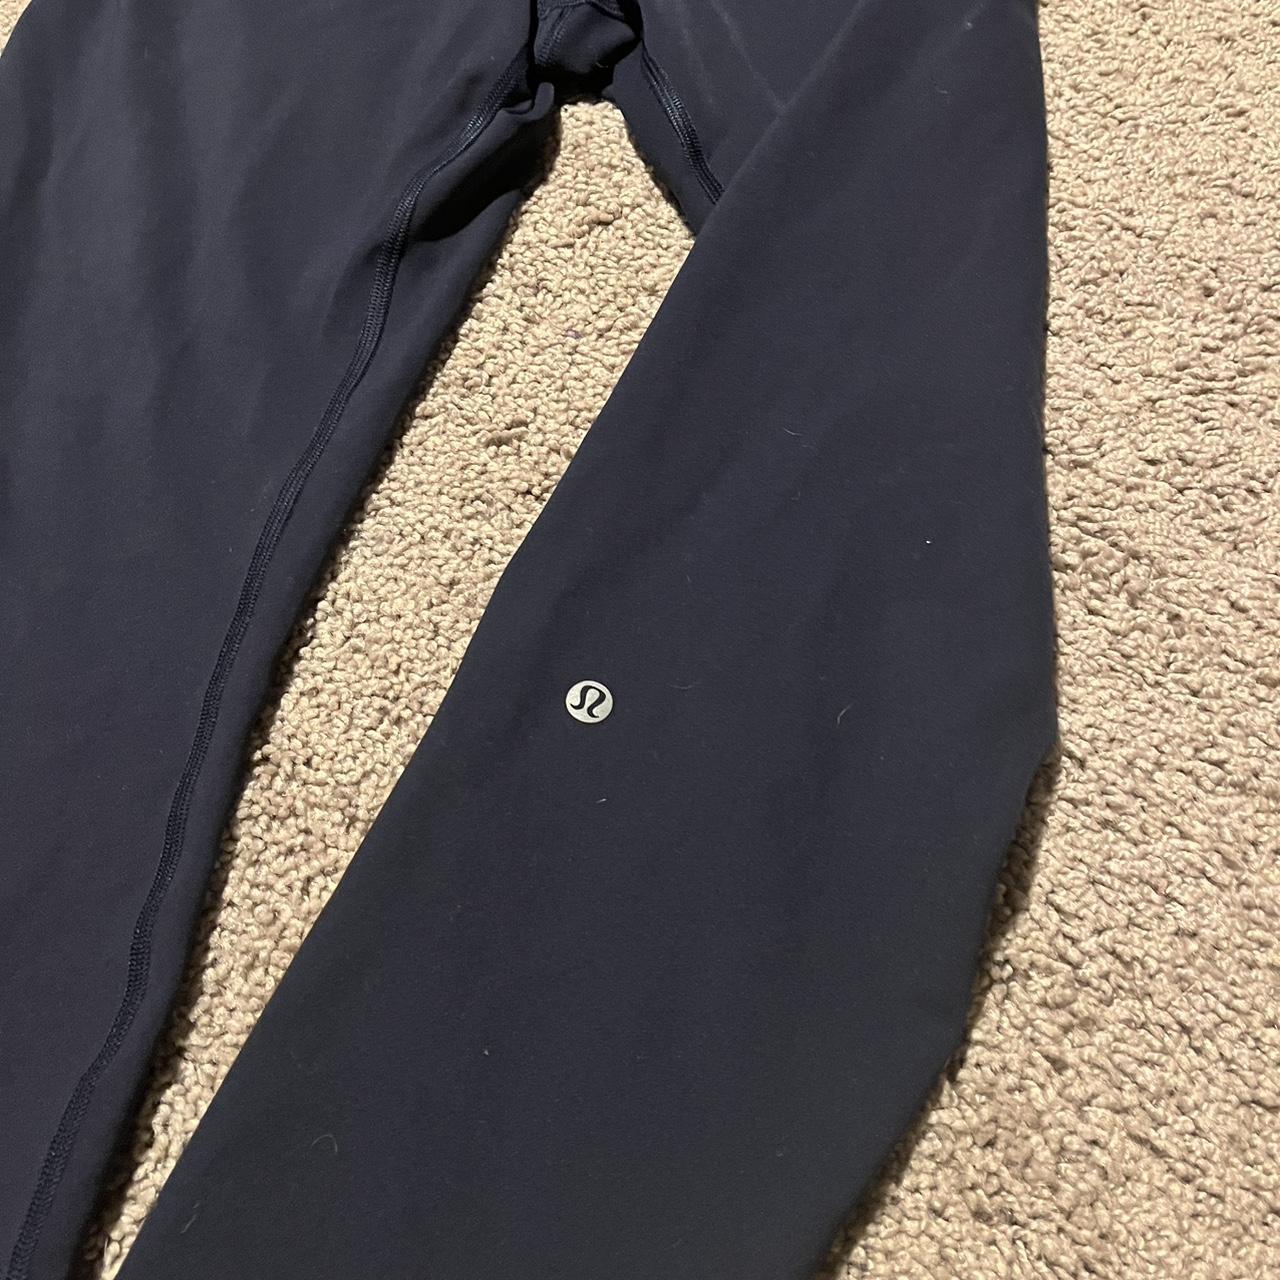 Penn State lululemon Women's Fast and Free 25 Tights